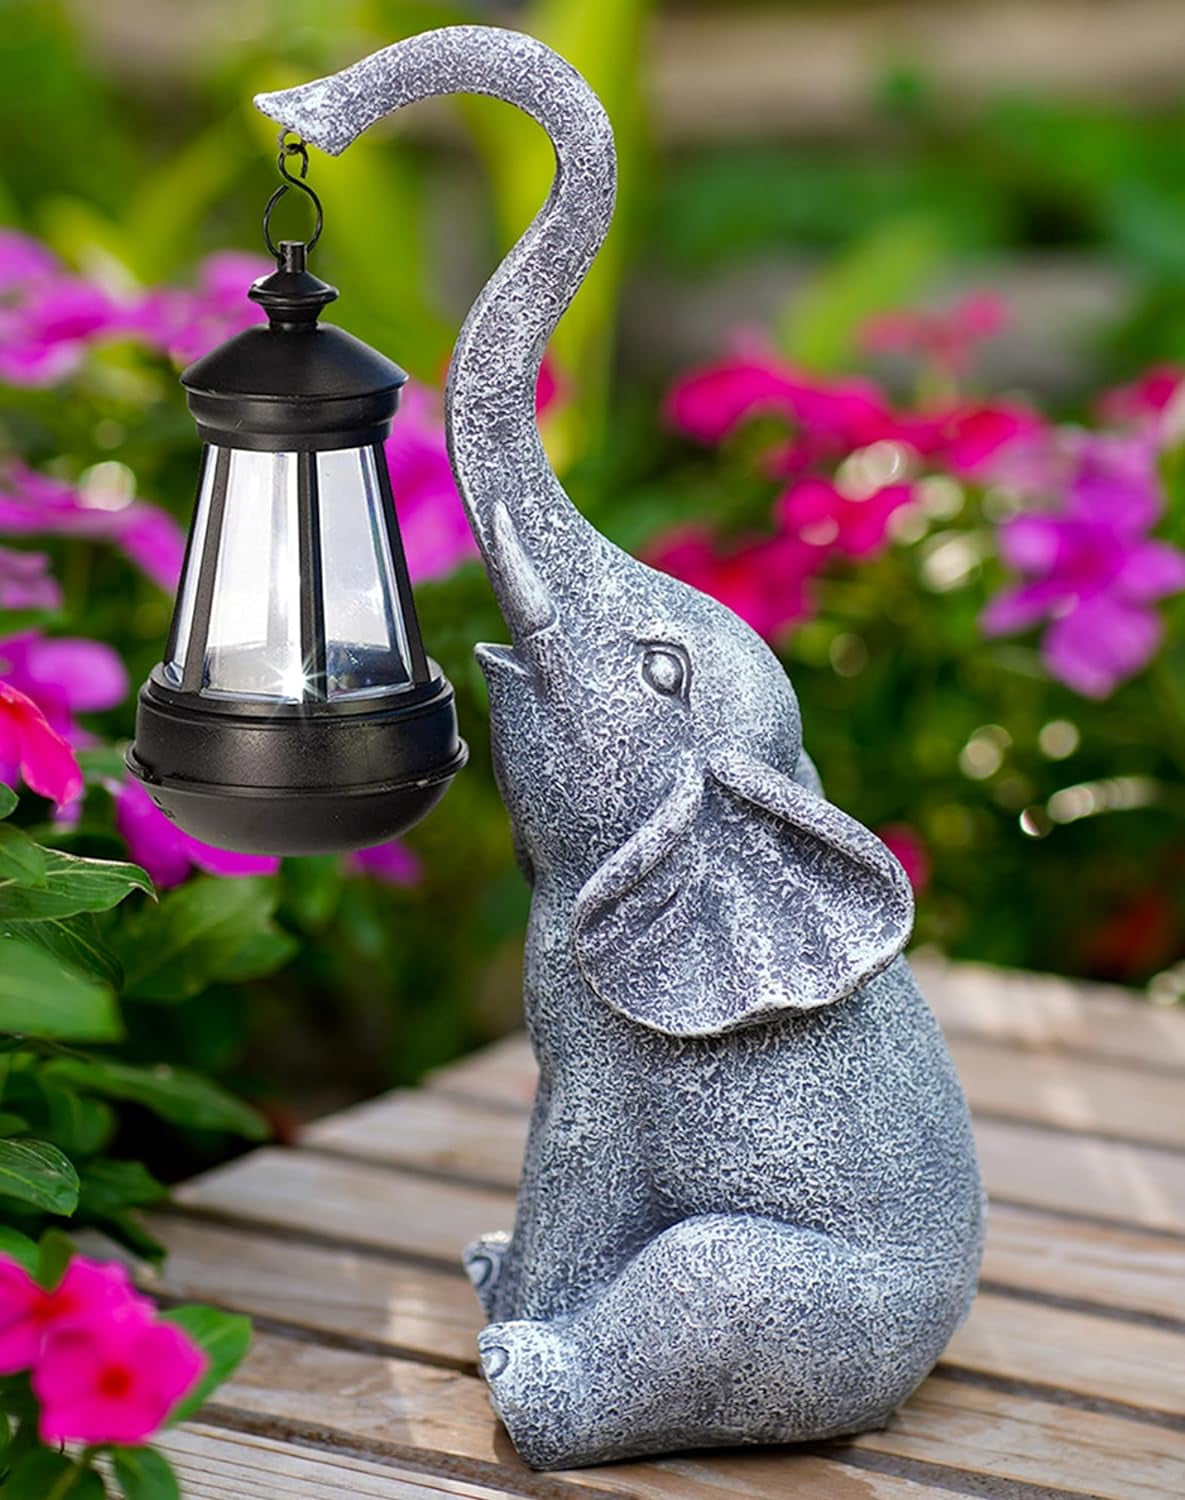 Solar-Powered Elephant Statue for Garden - Eco-Friendly Outdoor Decor with LED Lighting, Weather-Resistant for Pathways & Flowerbeds, Unique Garden Gift for Women & Animal Lovers